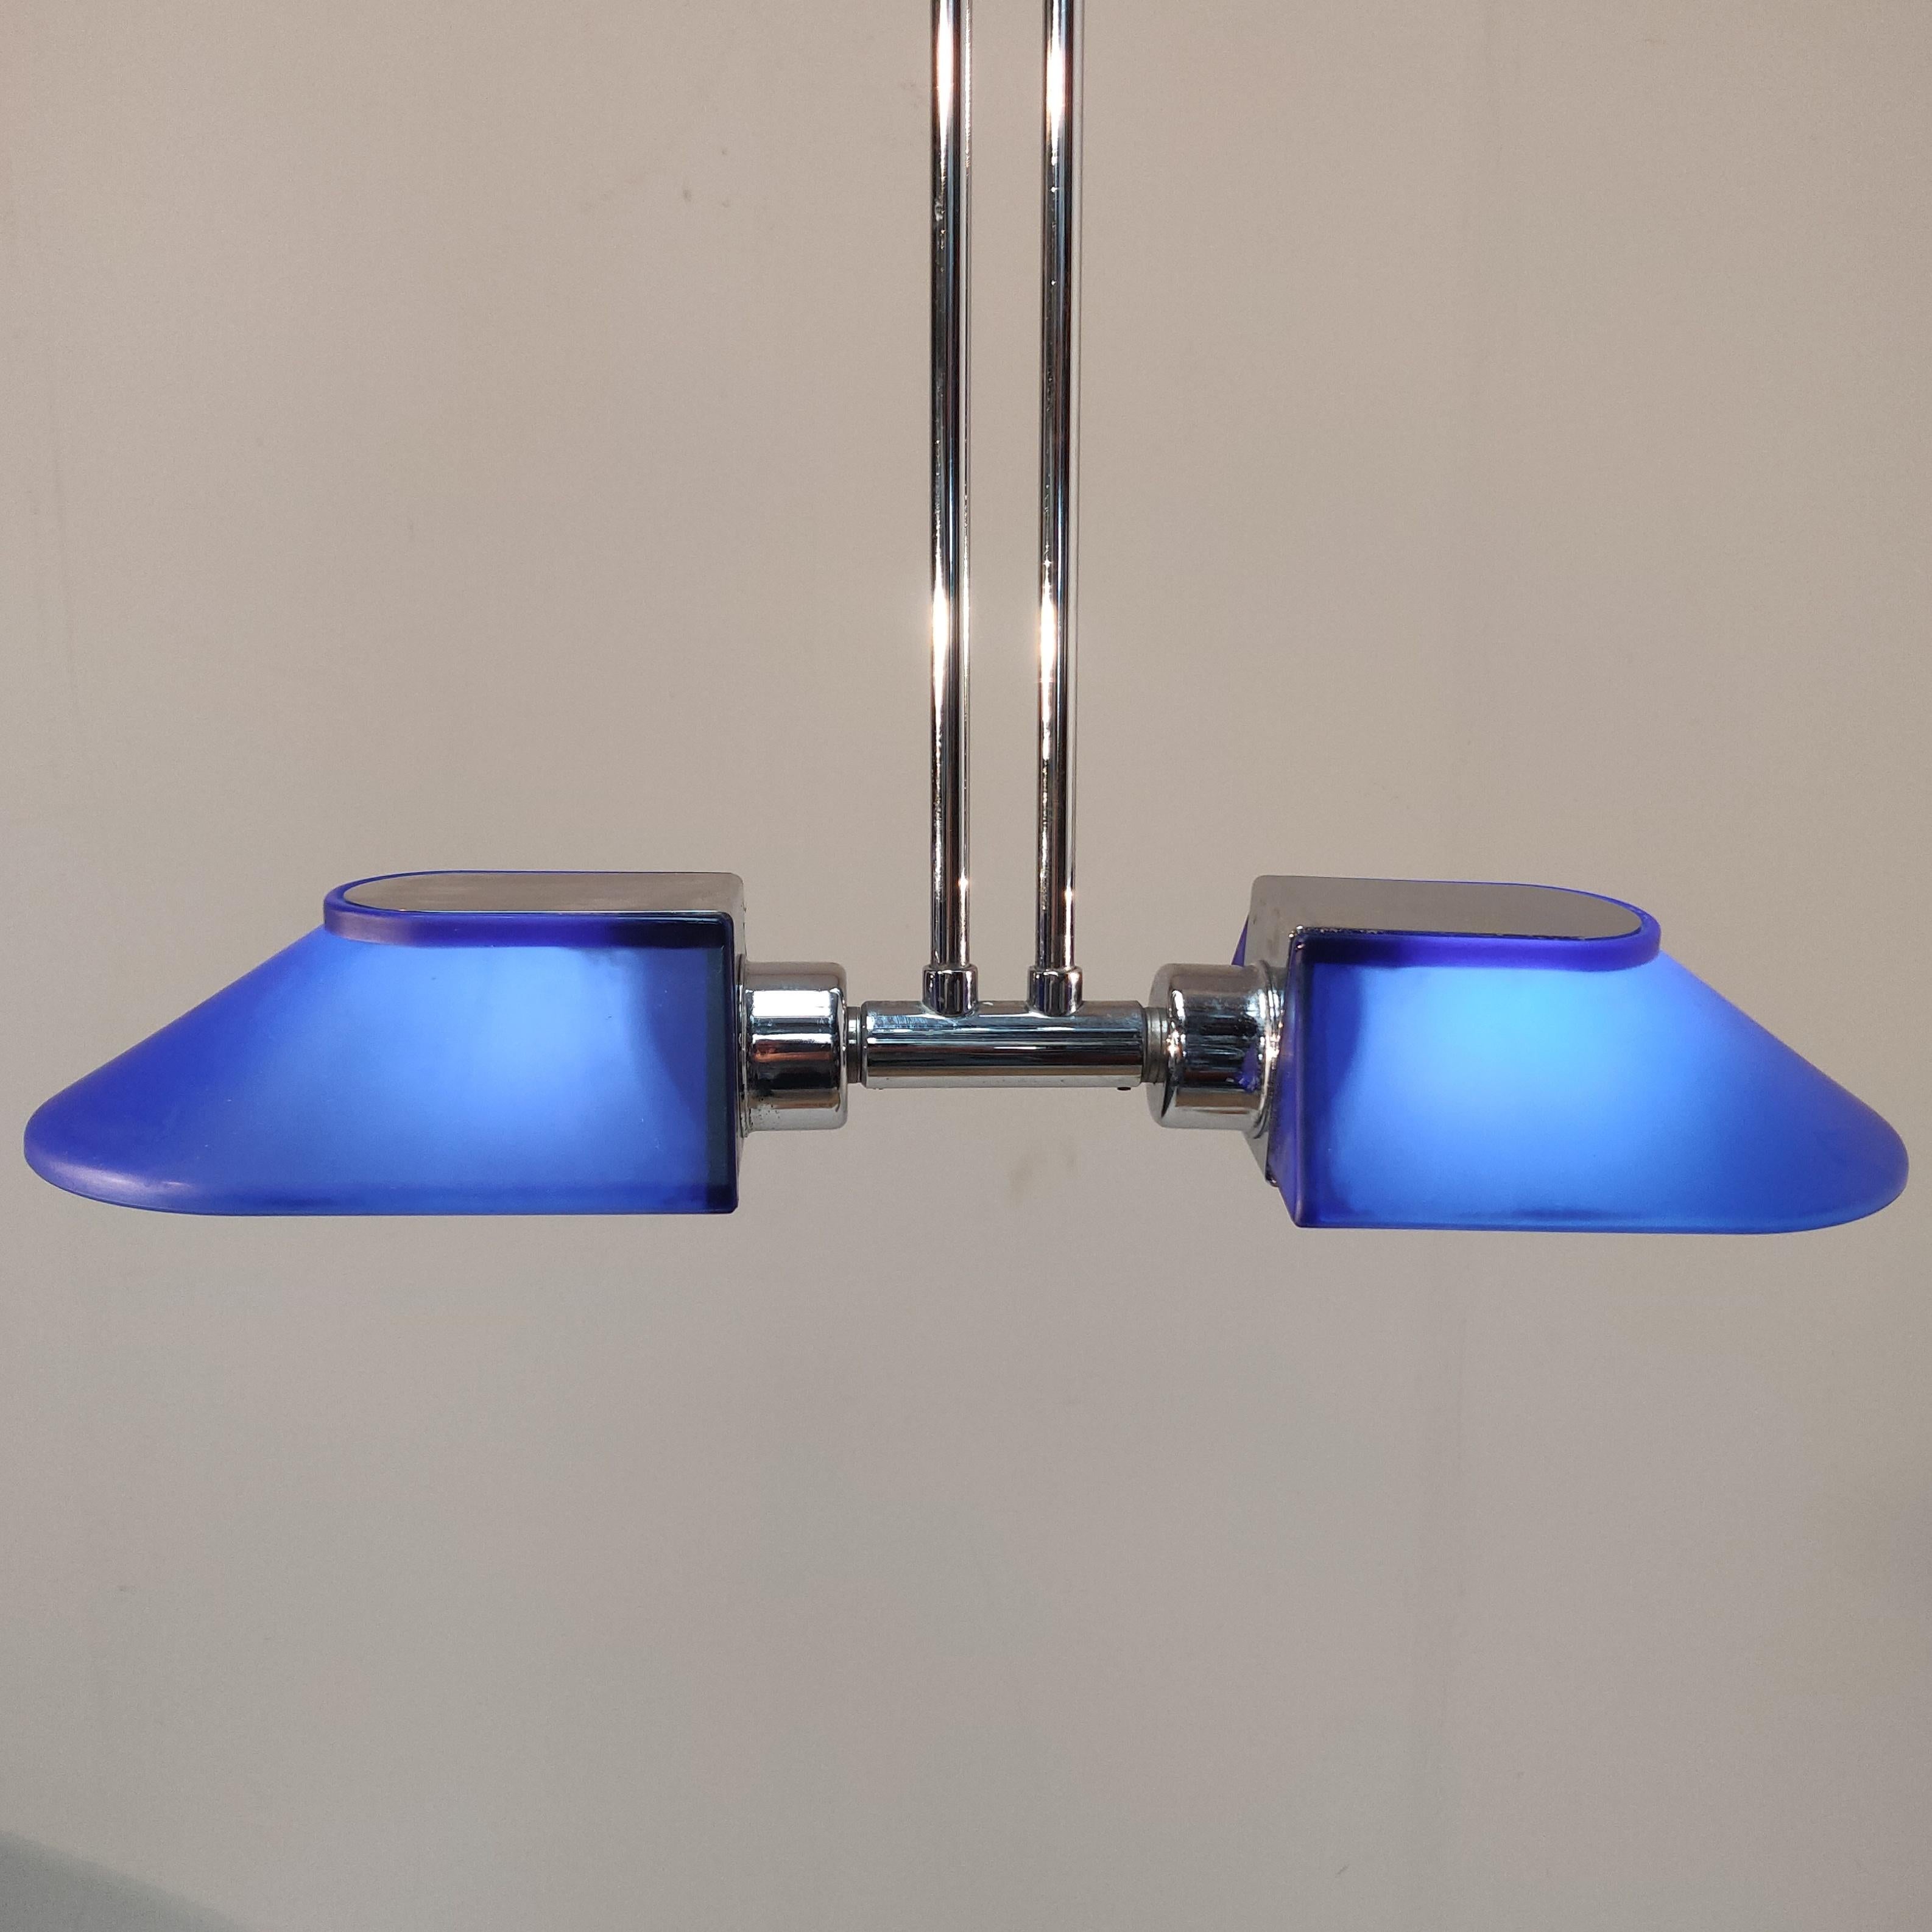 A Wonderfull pendant by Hustadt Leuchten with blue frosted rotatable glass shades and chromed in length adjustable 85-160 cm shaft.
The height is adjustable between 85 and 160 cm, the shades and its holder are 46 x 13 x 7 cm.
The combination of